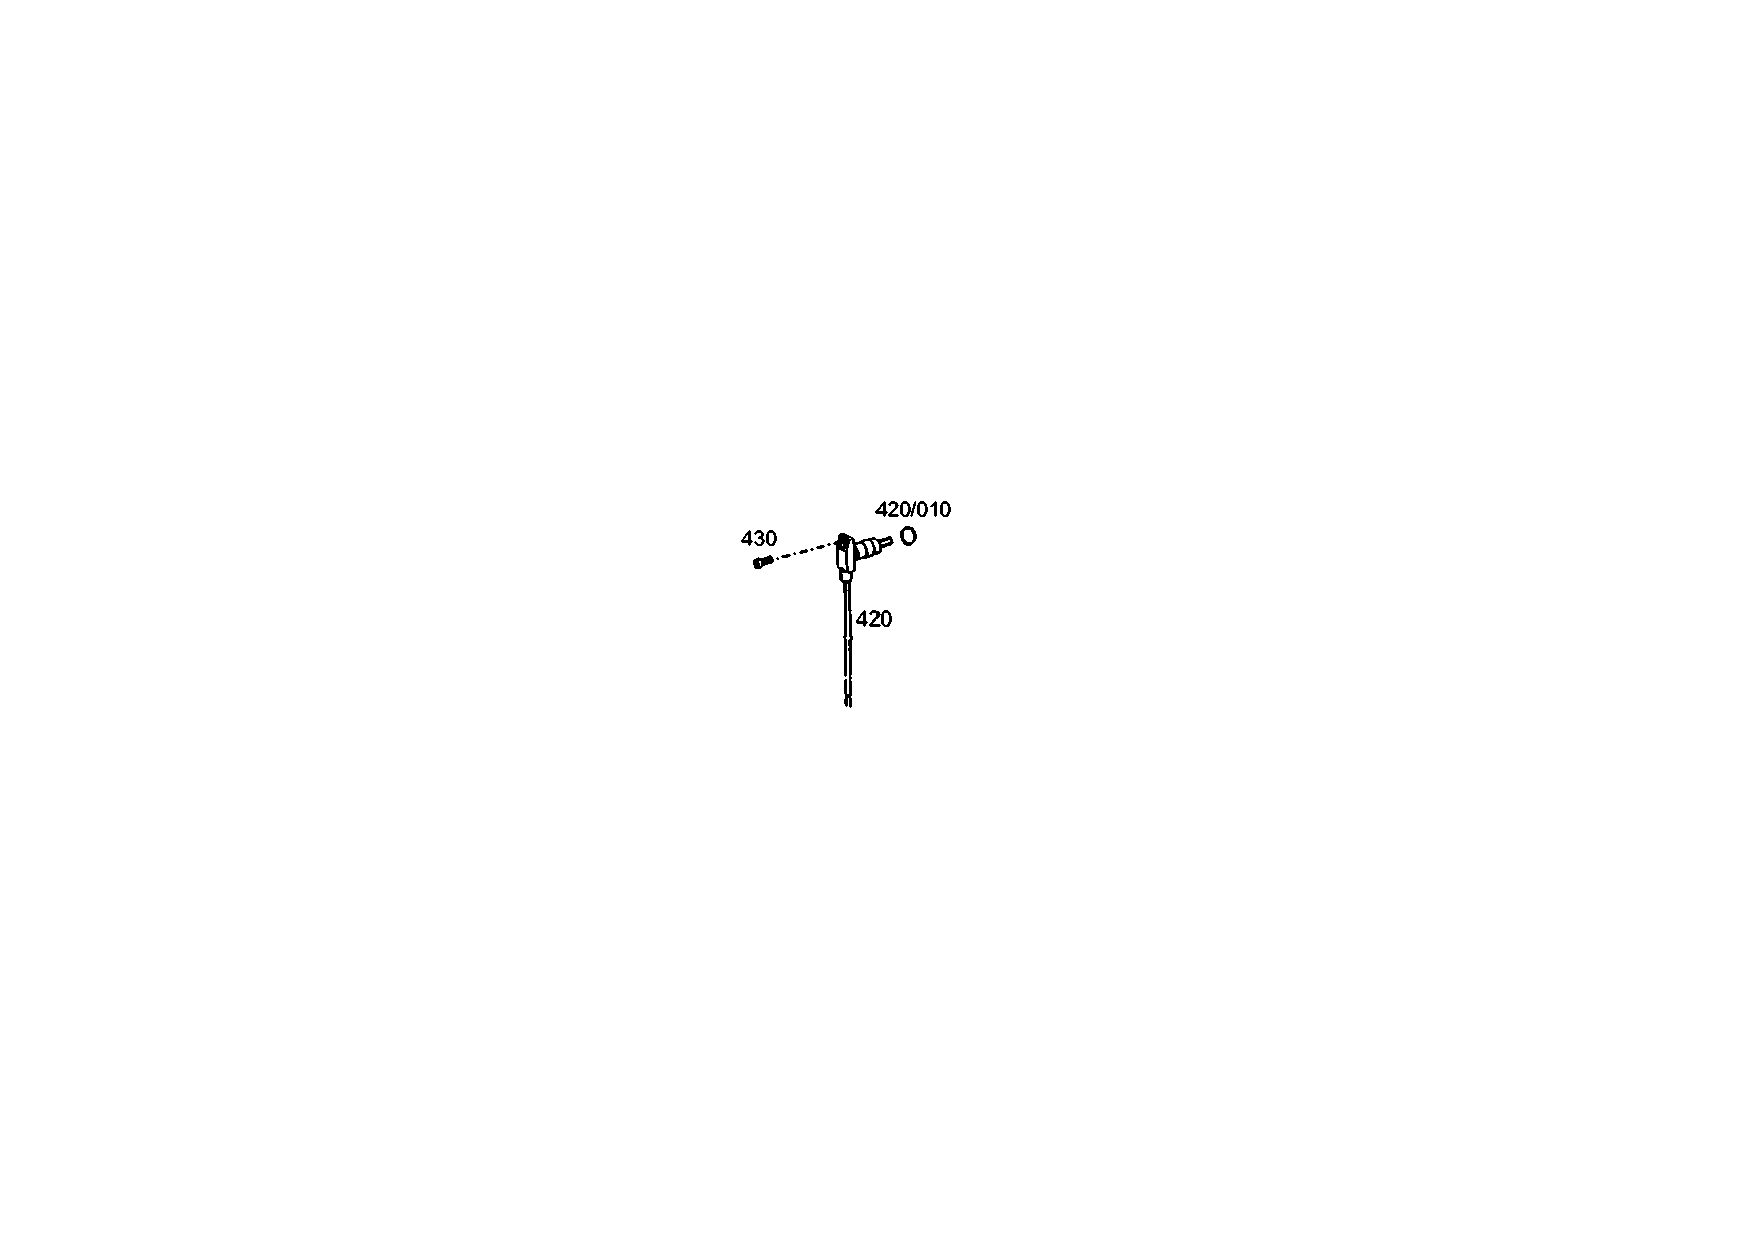 drawing for MAN N1.01101-4214 - REVOLUTION COUNTER (figure 1)